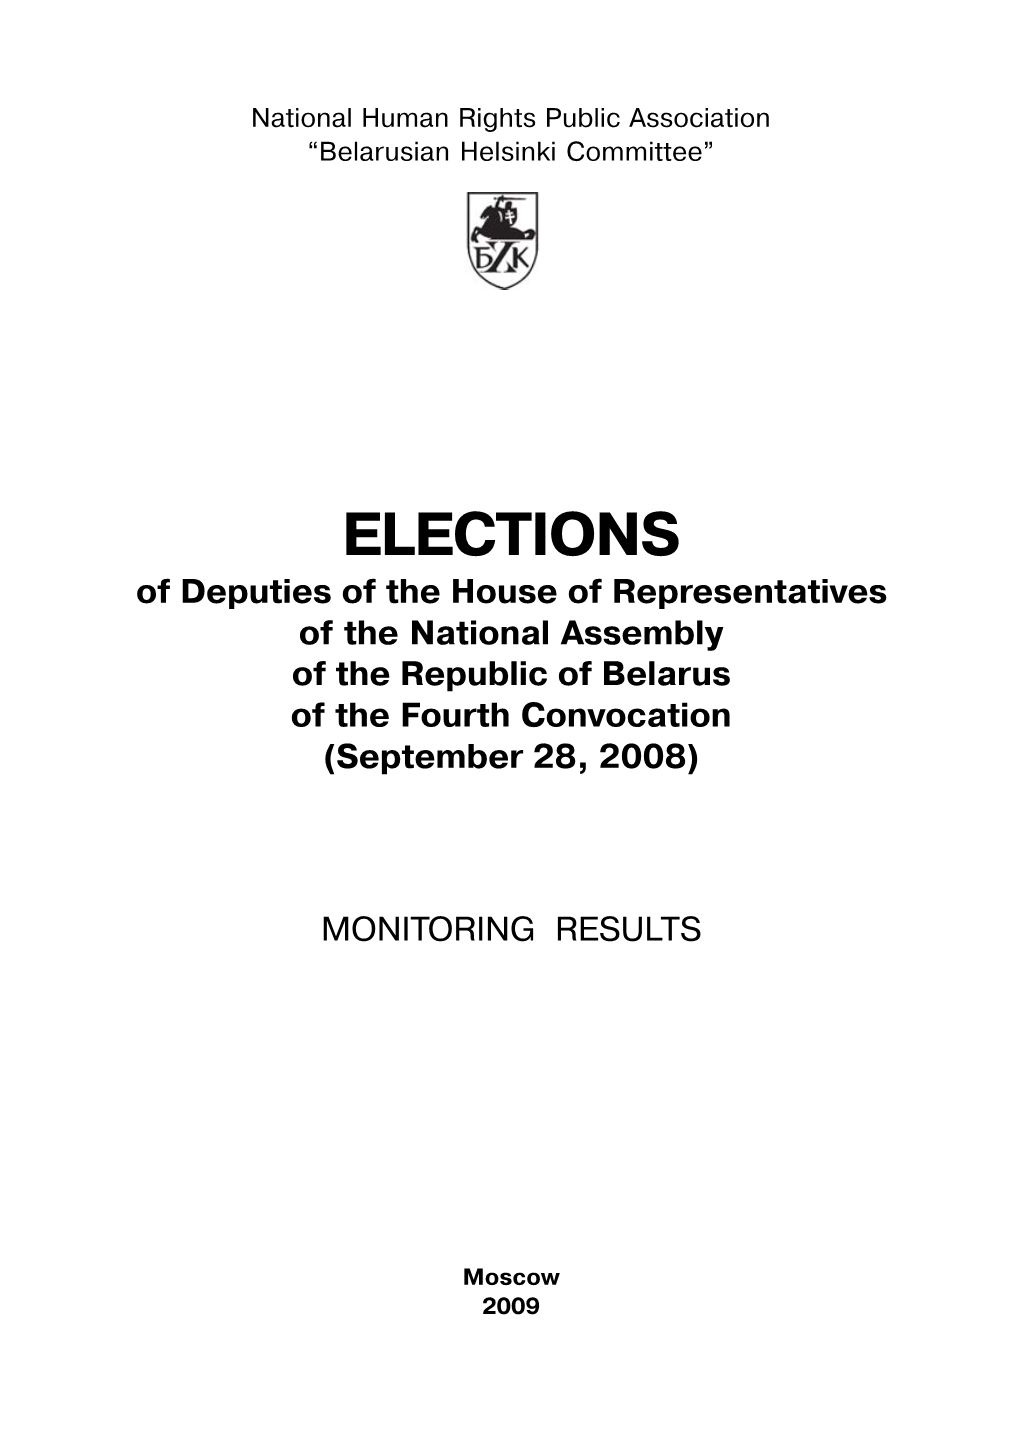 ELECTIONS of Deputies of the House of Representatives of the National Assembly of the Republic of Belarus of the Fourth Convocation (September 28, 2008)